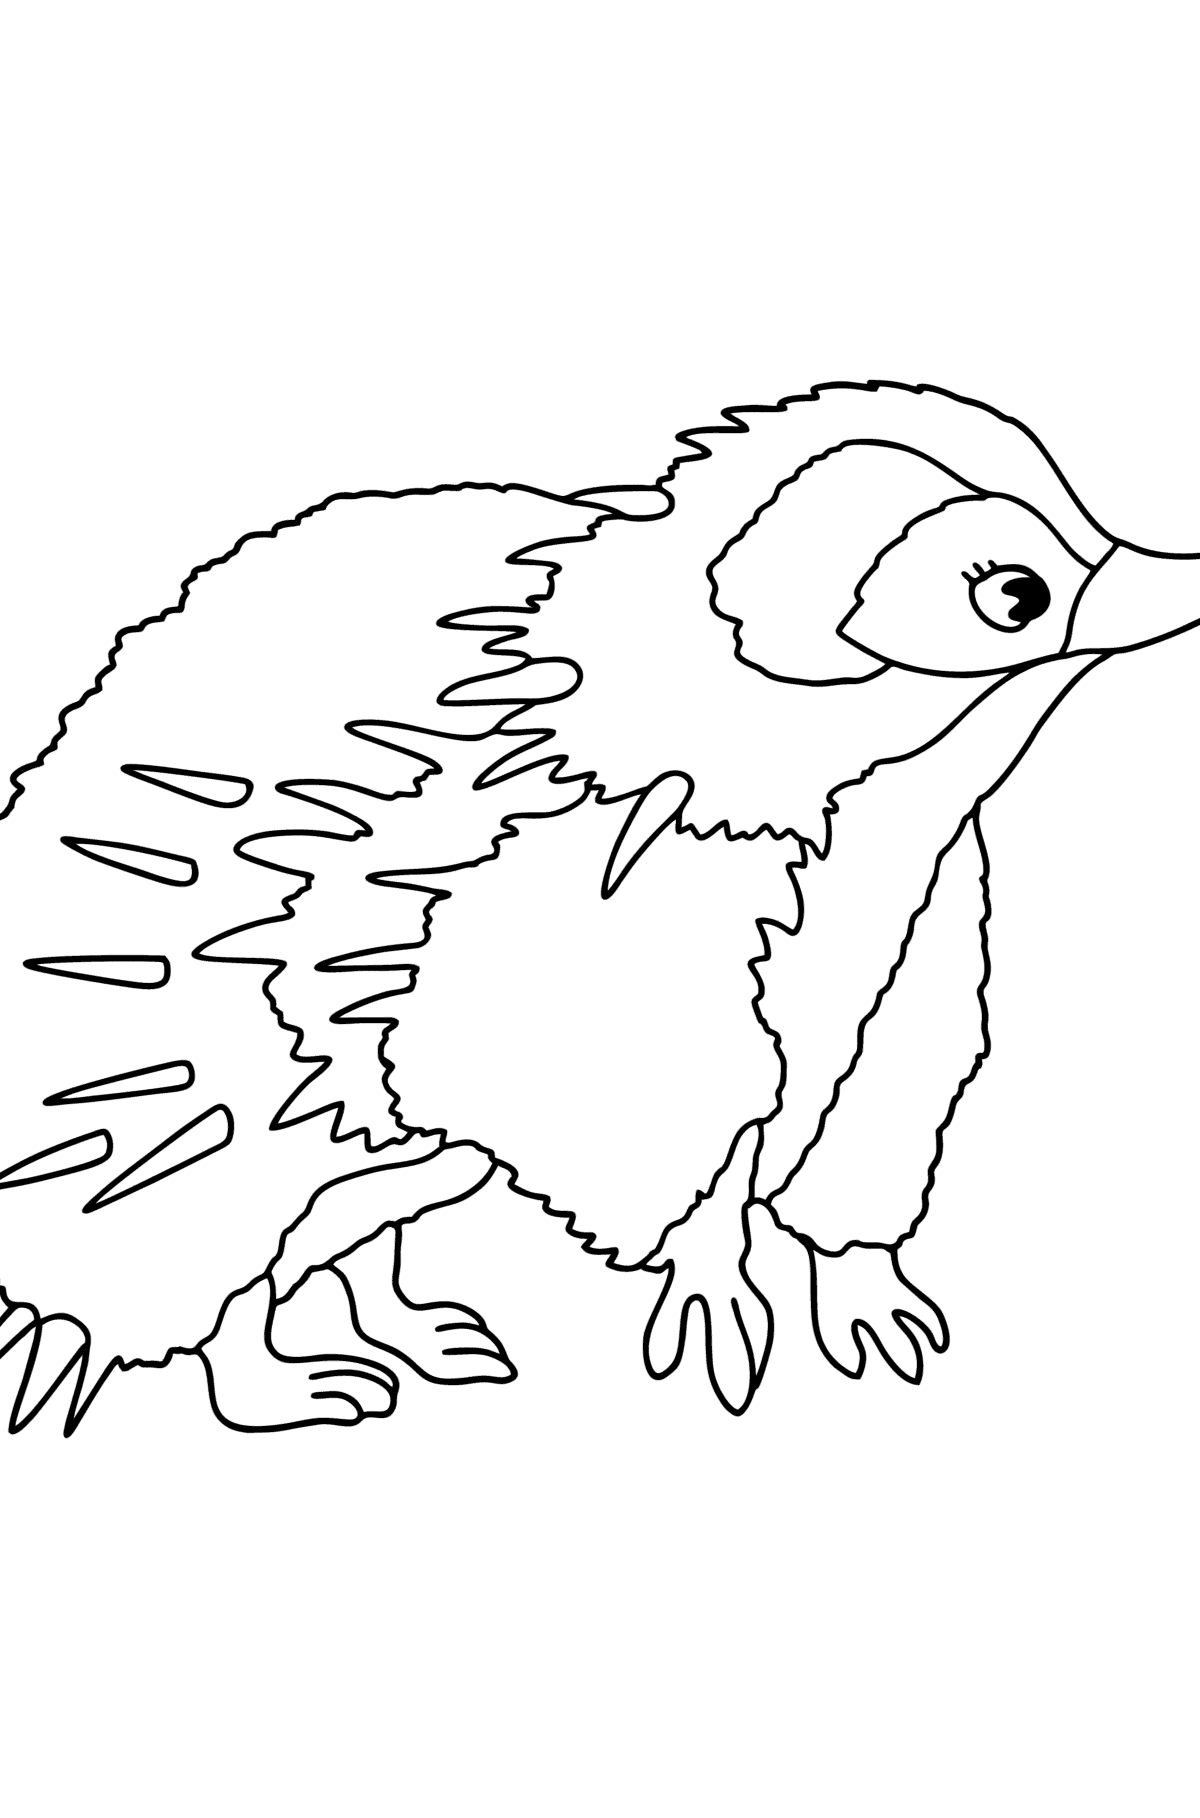 Echidna Australia сoloring page - Coloring Pages for Kids